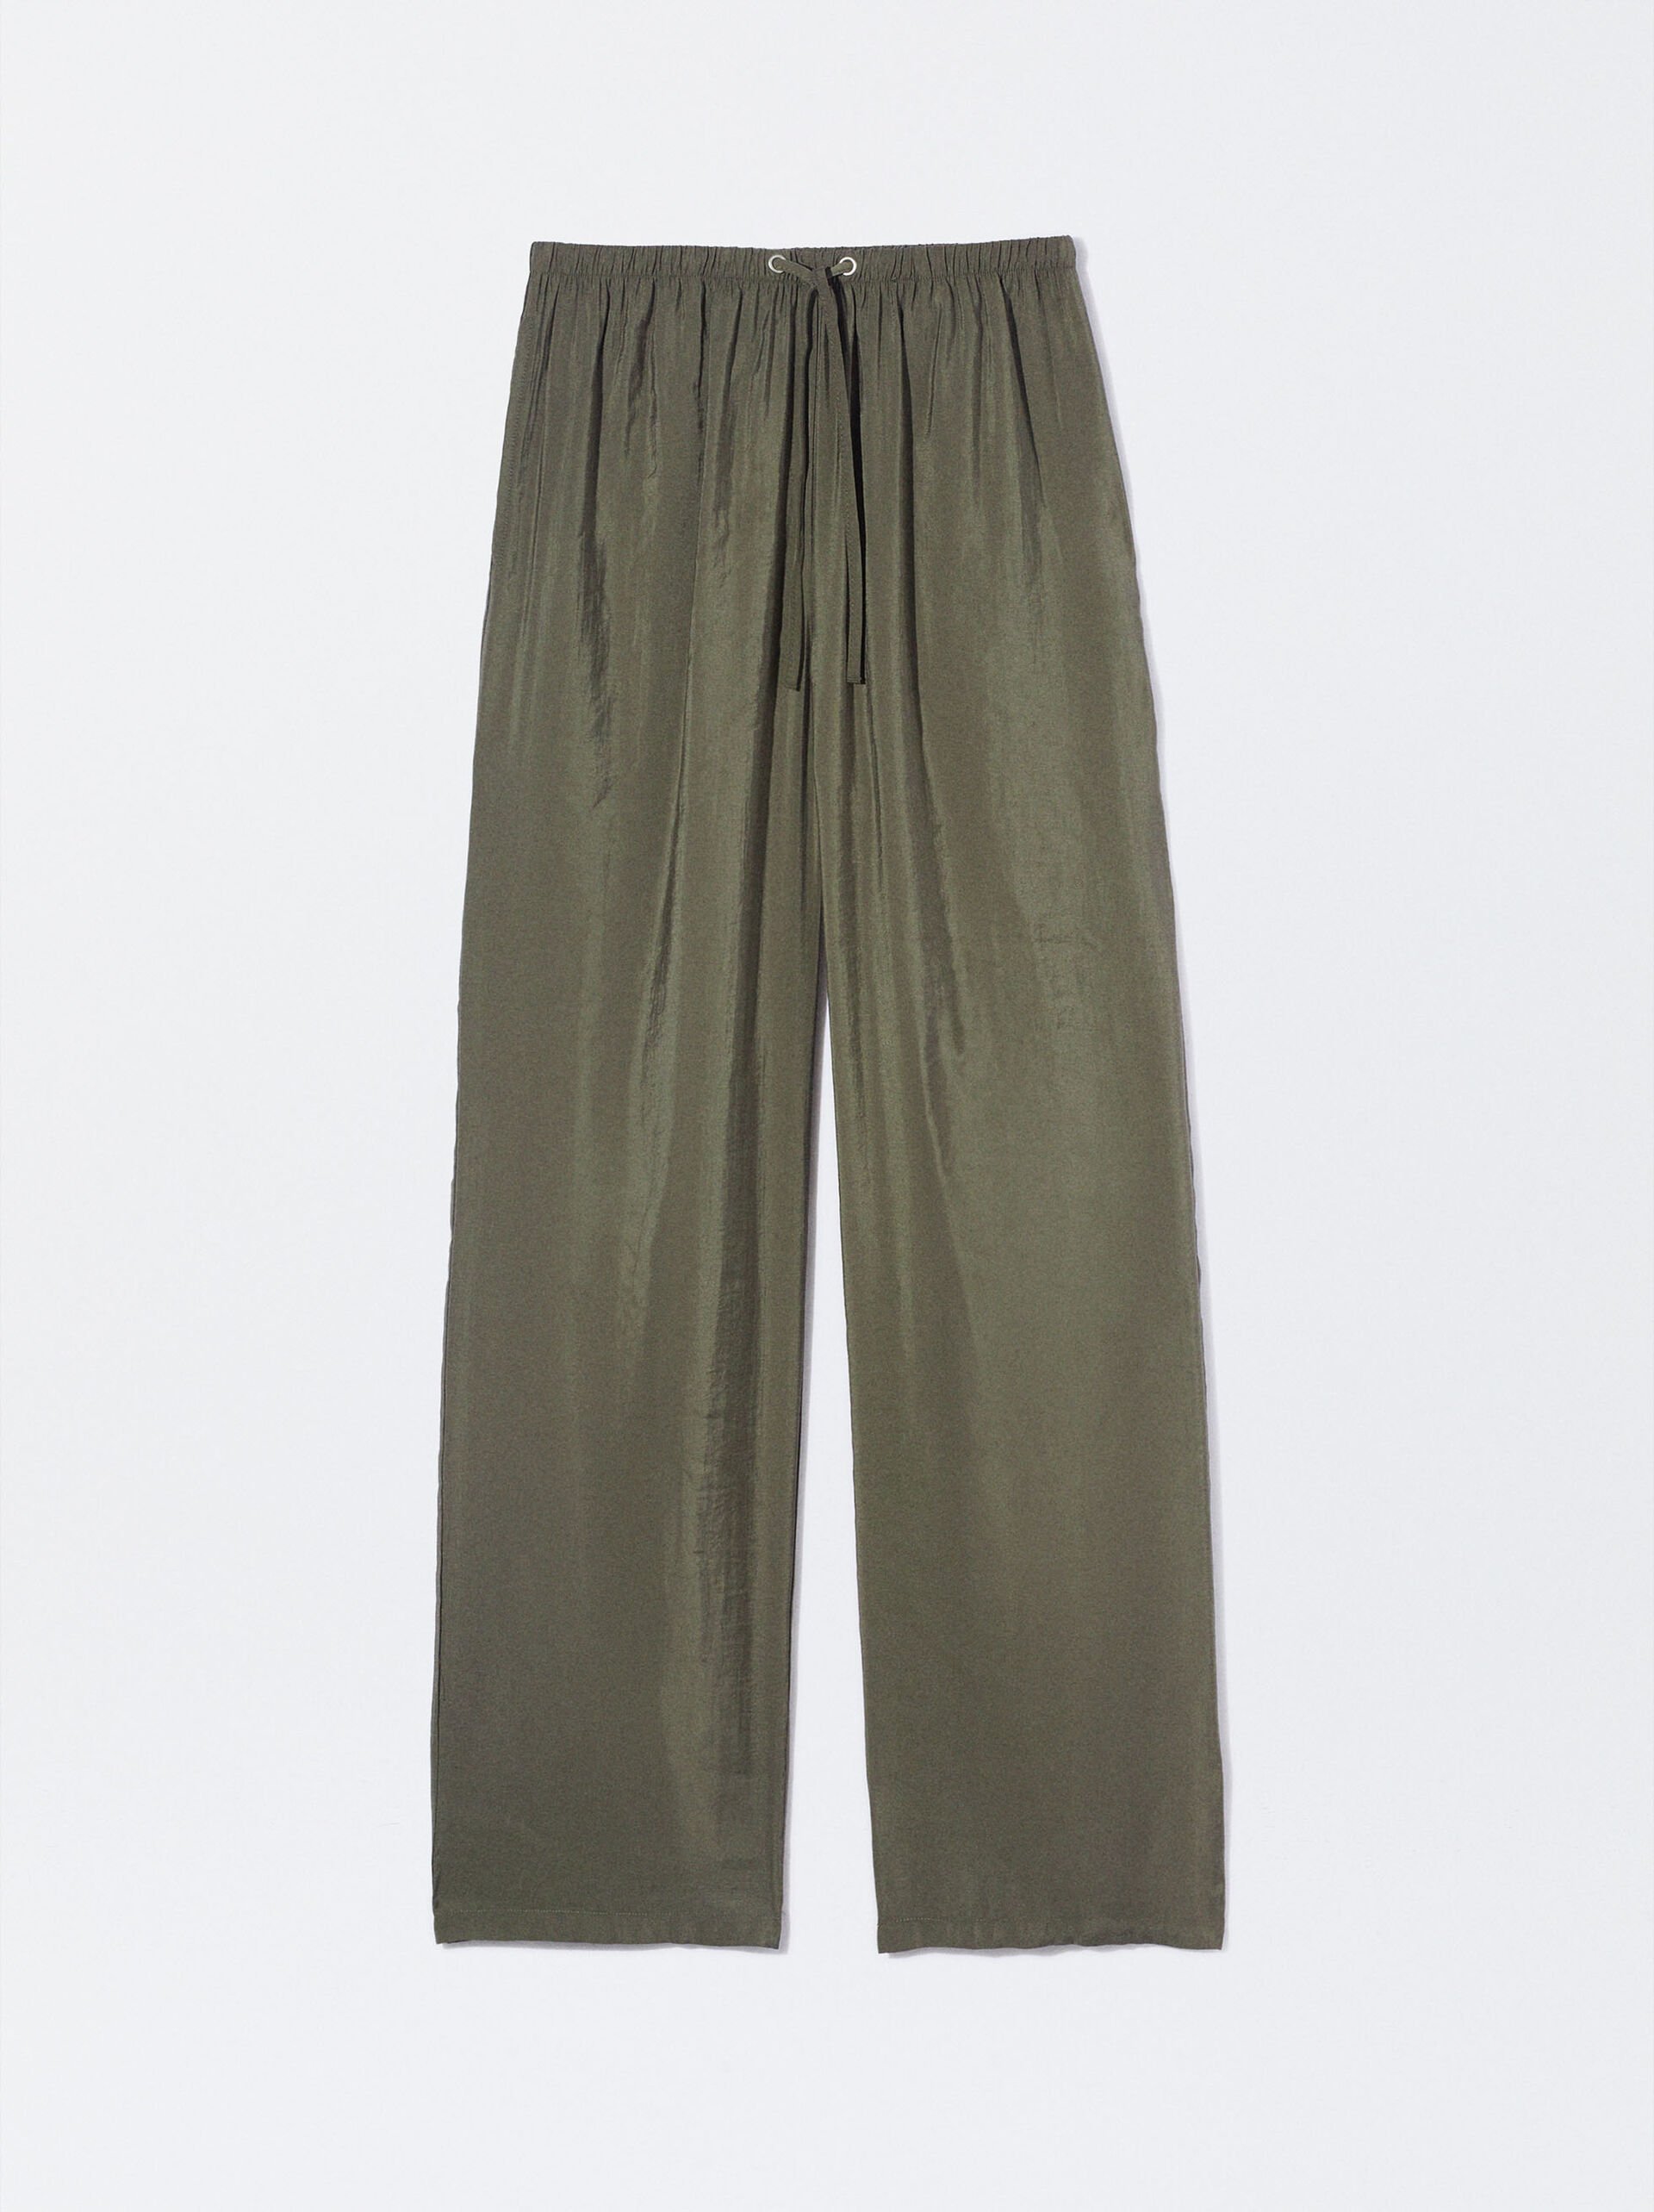 Adjustable Loose-Fitting Trousers Pants With Drawstring image number 5.0